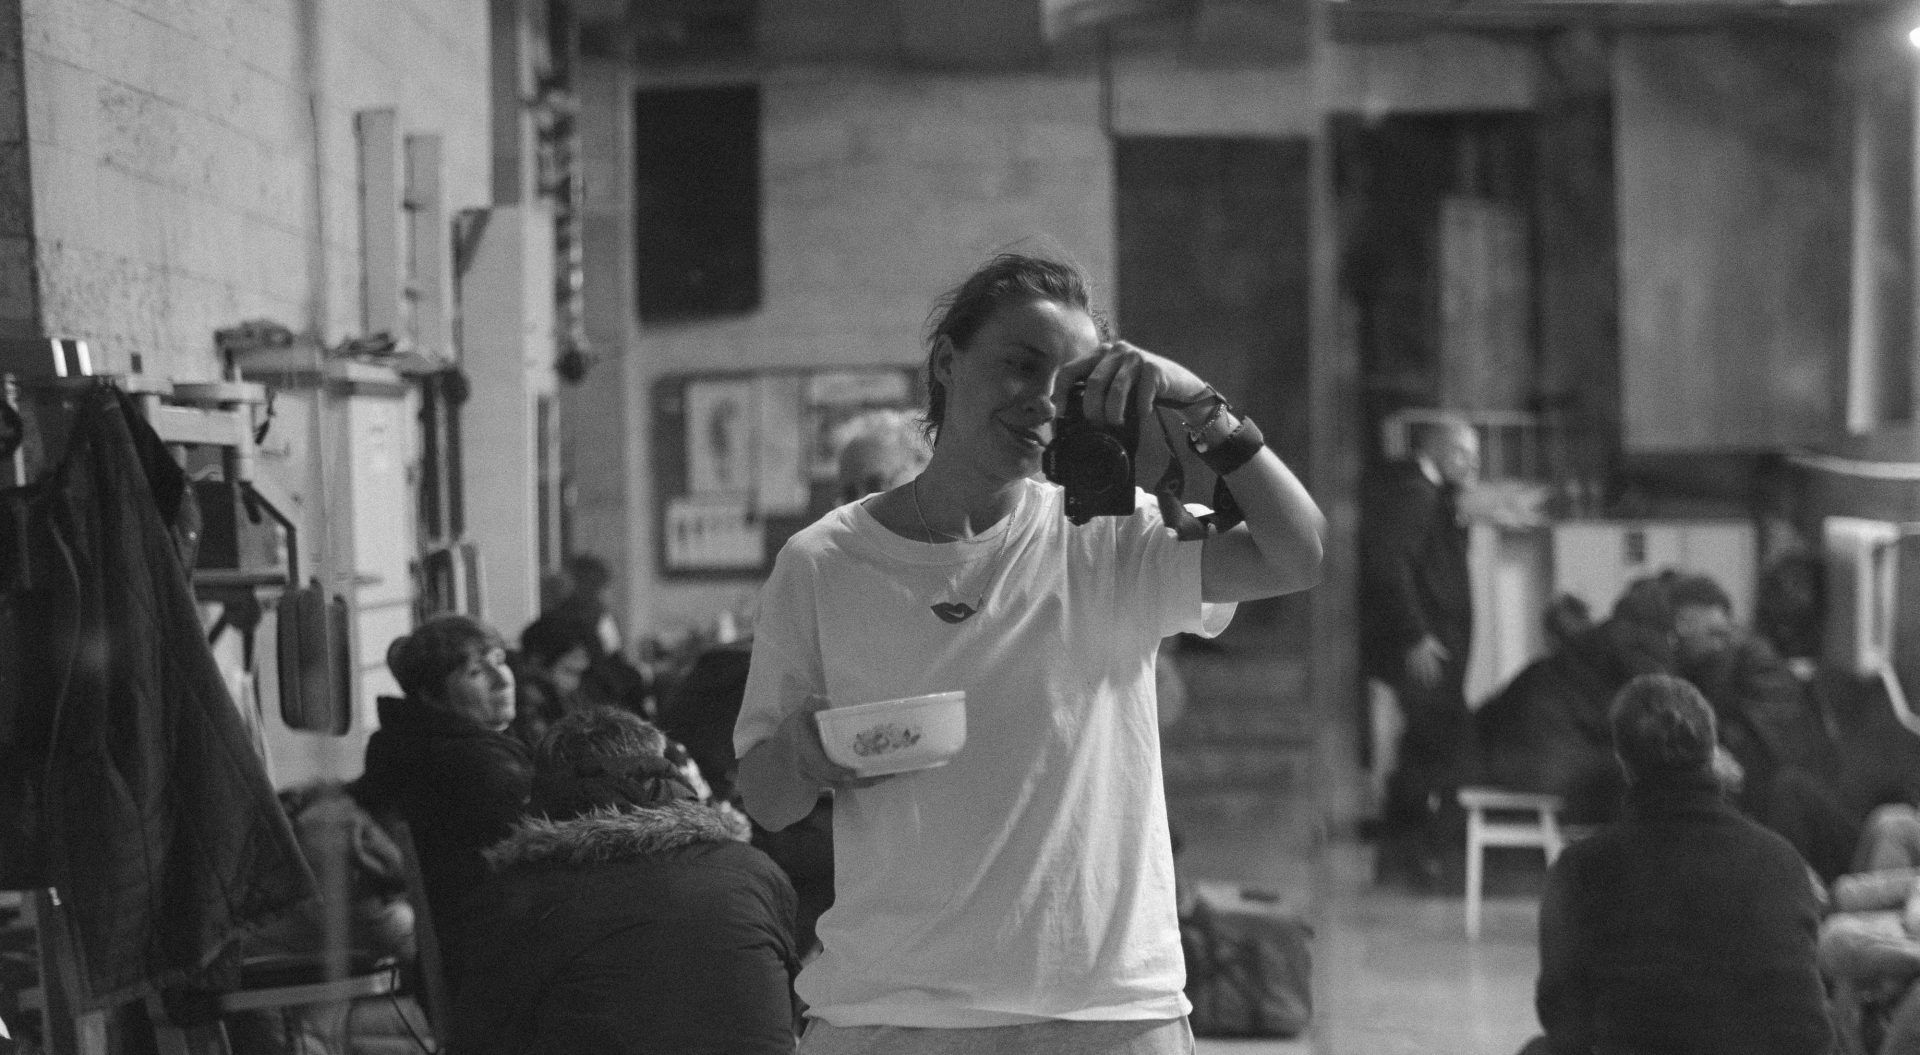 A woman stands with a camera depicting herself, black and white 